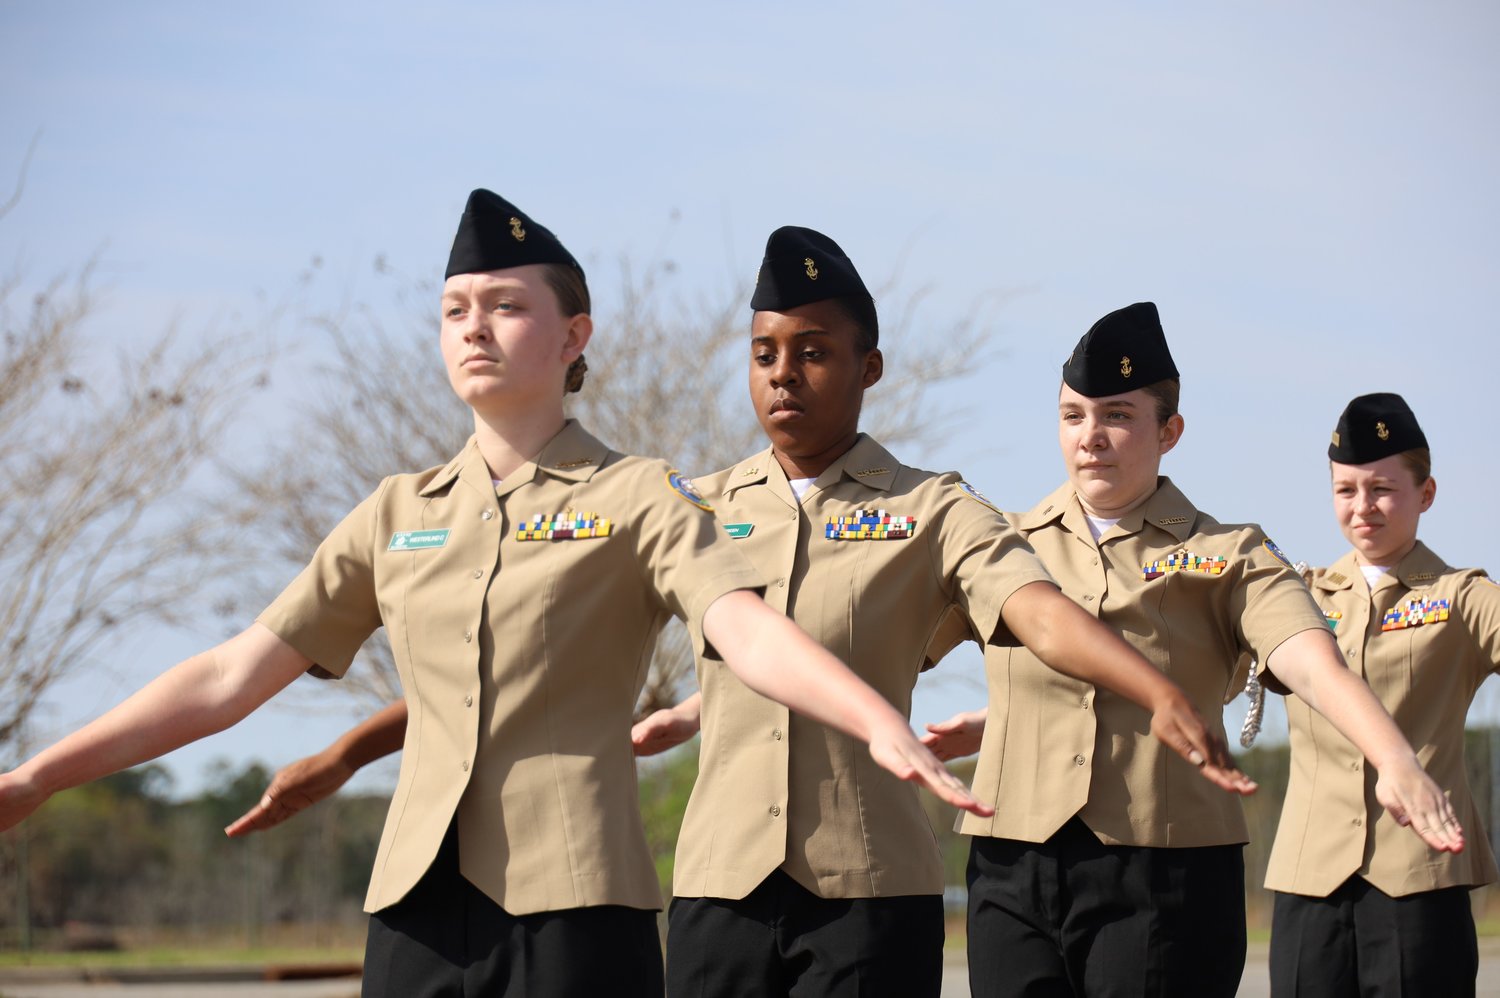 The Nease NJROTC Unarmed Exhibition Drill Team competes under the watchful eye of a Marine Corps judge during the Area 12 Championships on March 4 in Douglas, Georgia. The unit claimed first place in this event. Nease Navy JROTC won the championship for the ninth consecutive year.